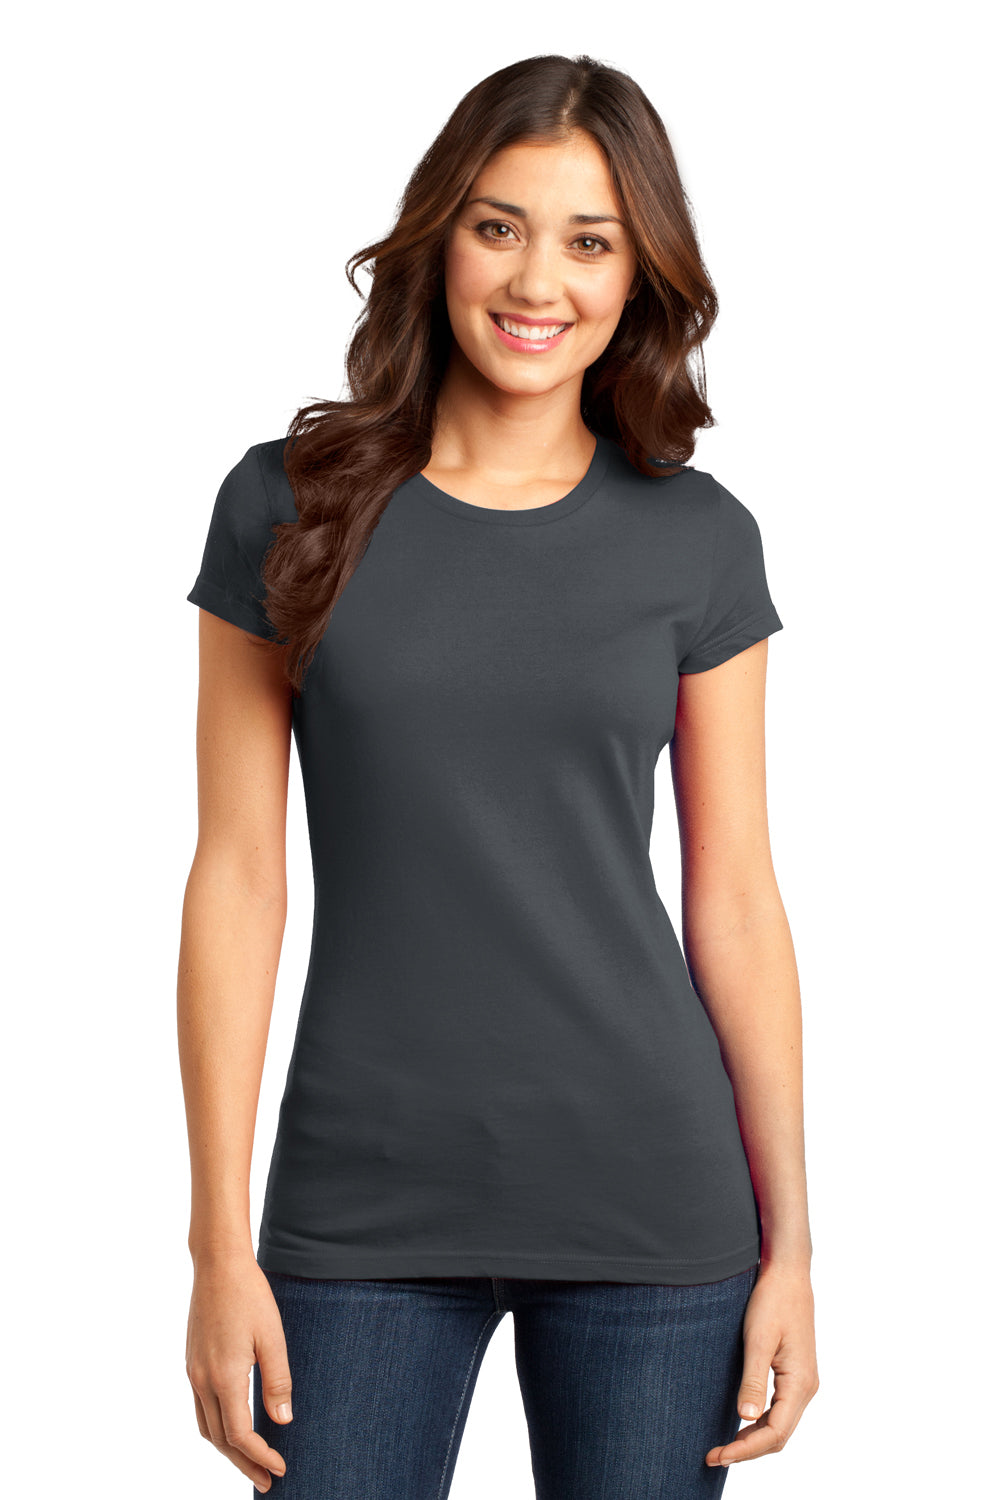 District DT6001 Womens Very Important Short Sleeve Crewneck T-Shirt Charcoal Grey Front